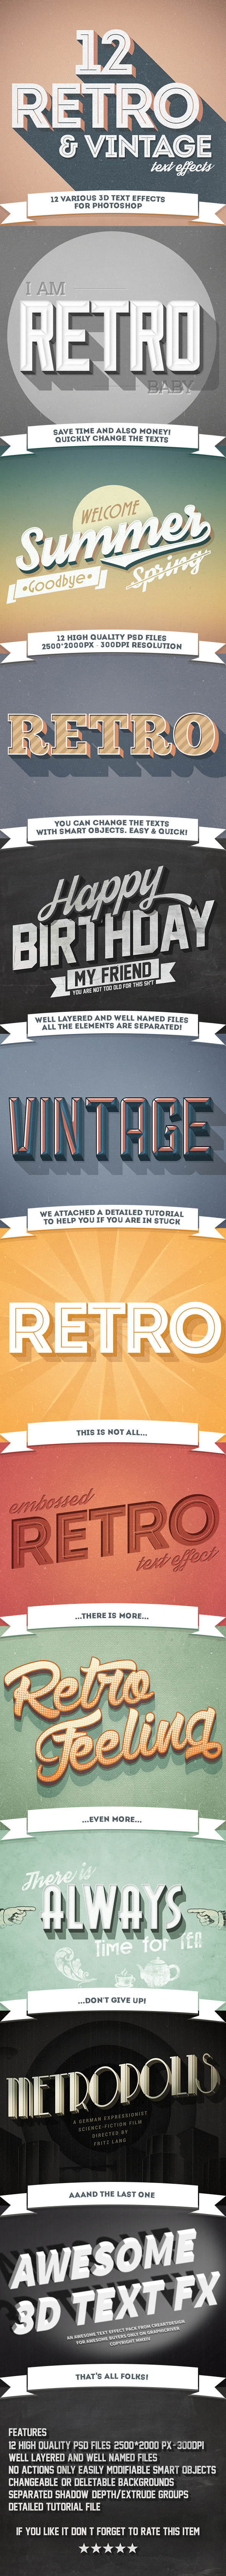 12 Various 3D Retro & Vintage Text Effects for Photoshop